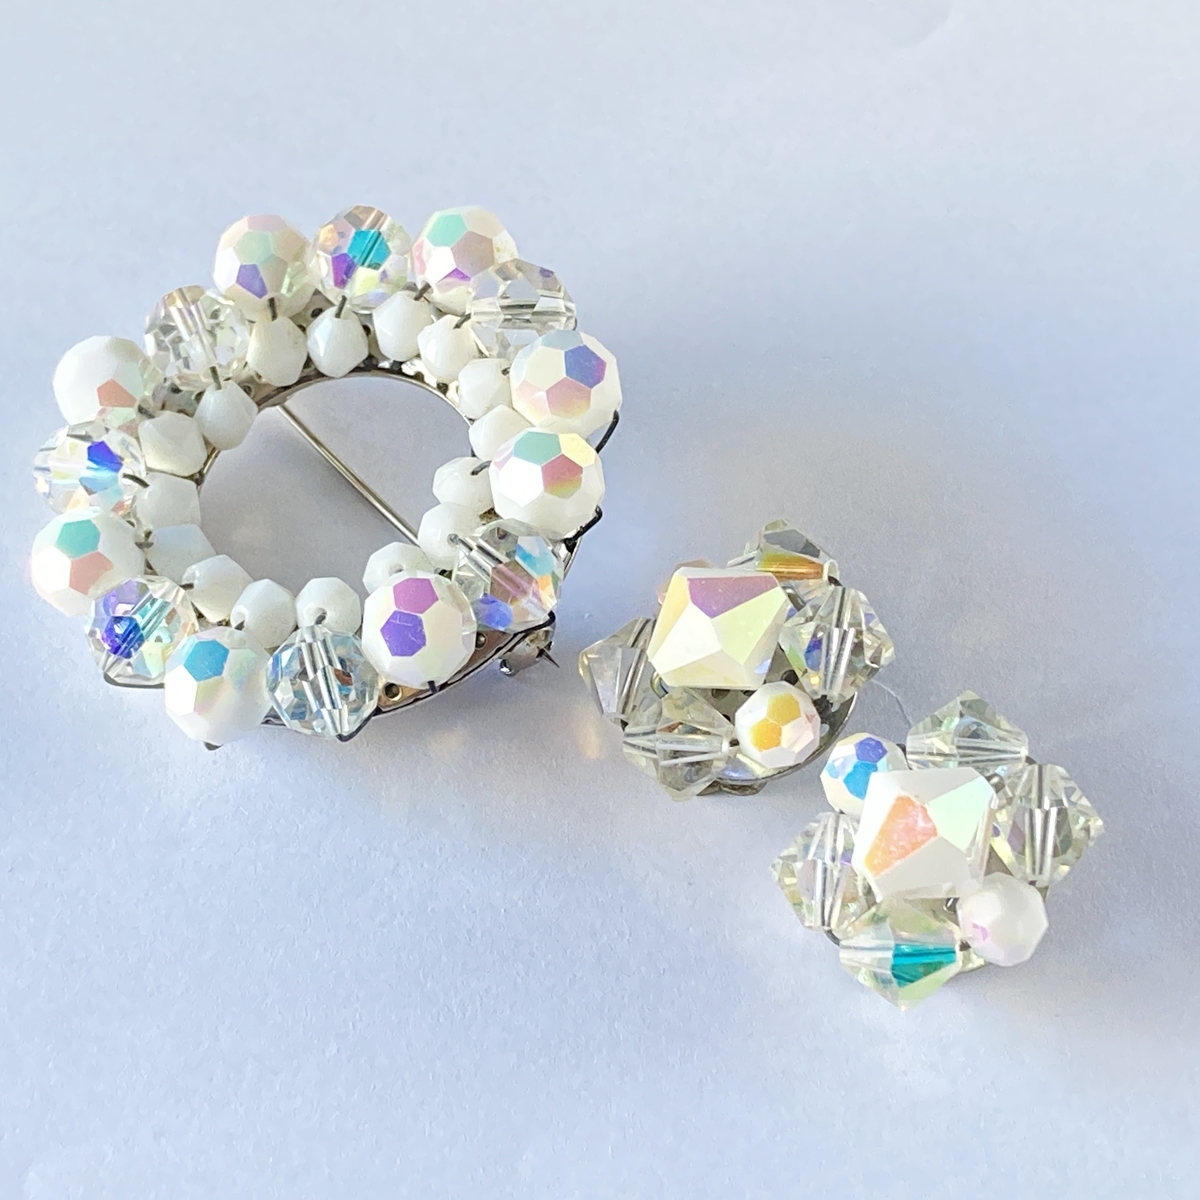 Beads Brooch Earrings Set 1960's Vintage Circle Clear Aurora White